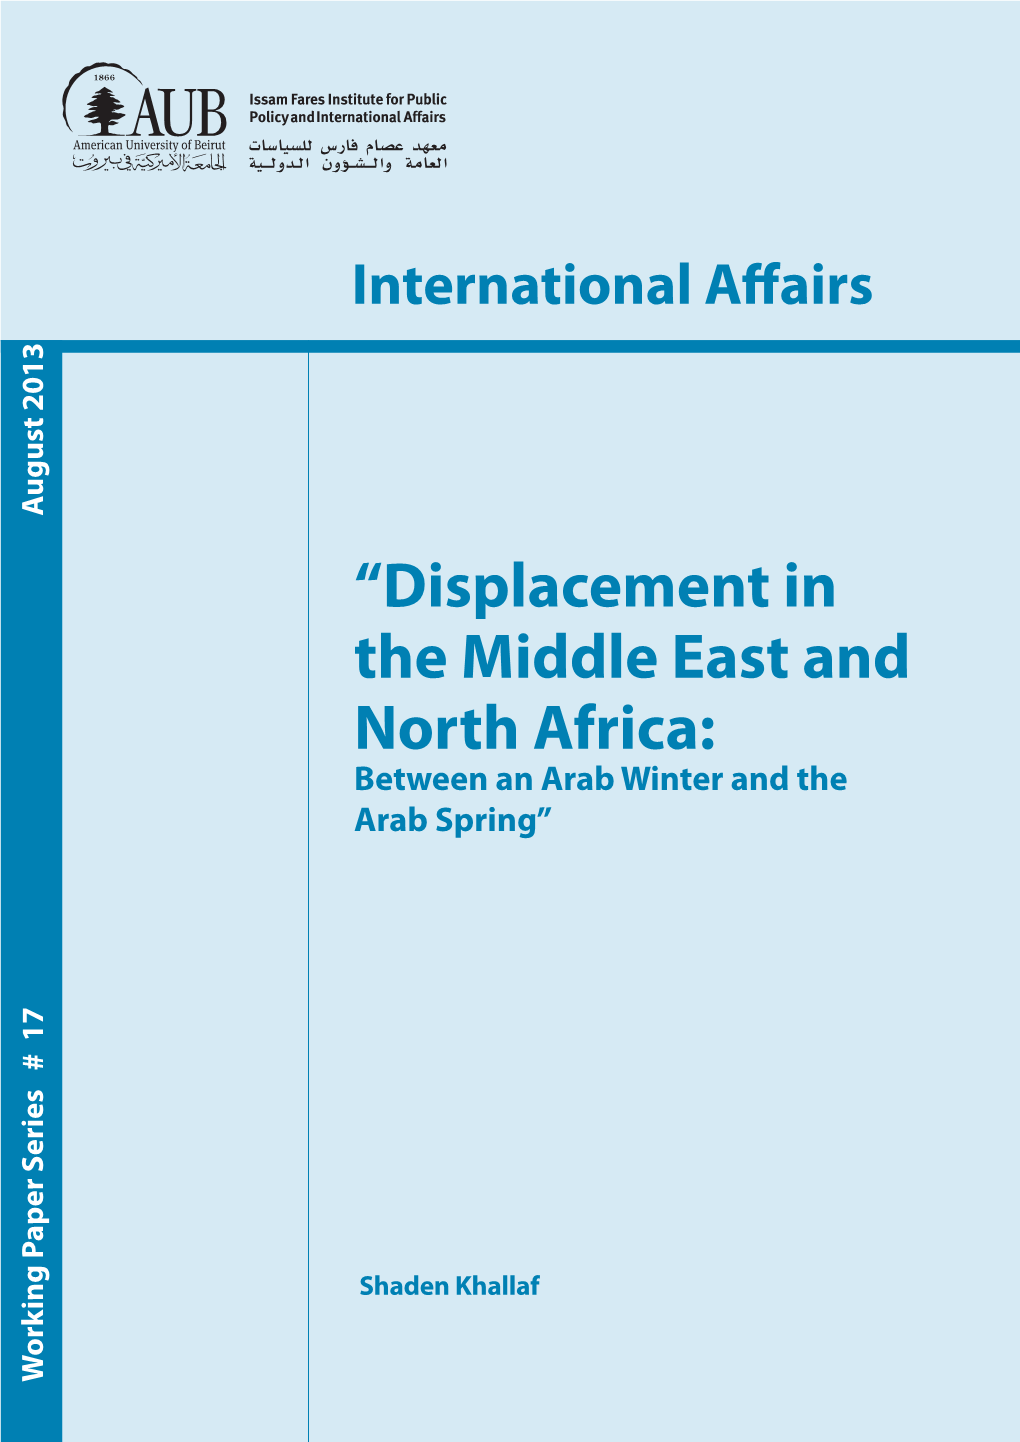 Displacement in the Middle East and North Africa: Between an Arab Winter and the Arab Spring” August 2013 August